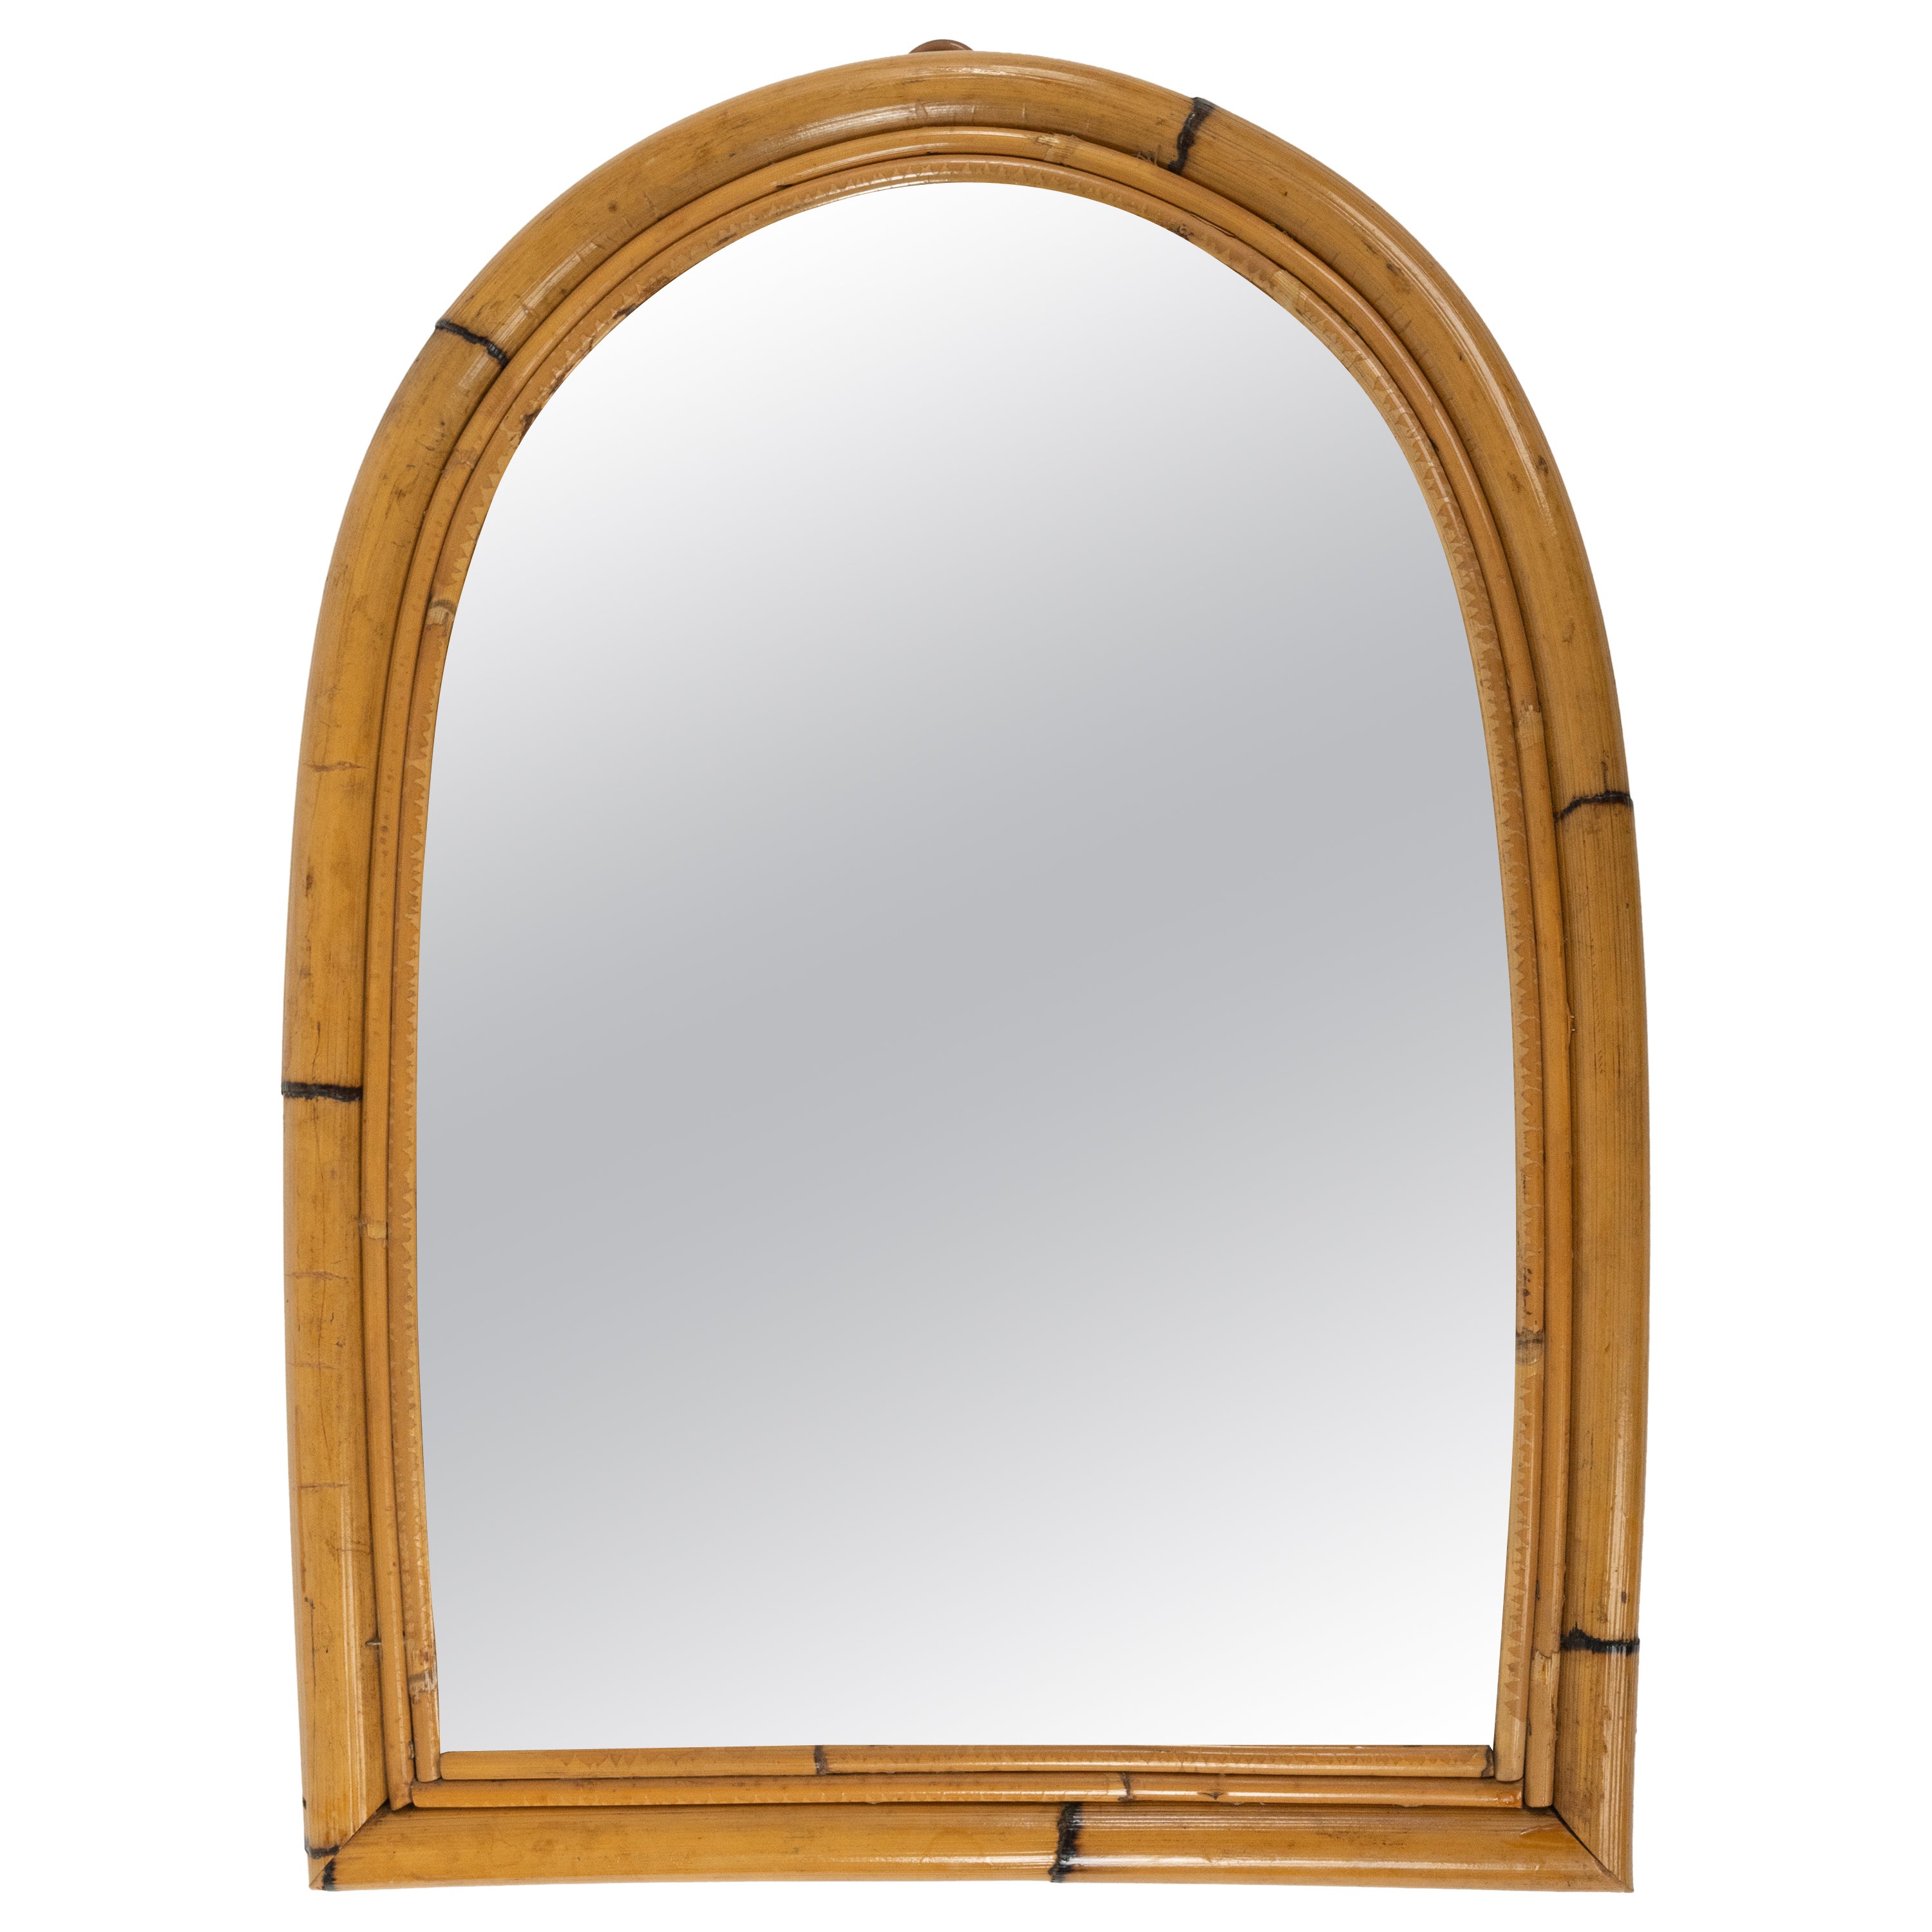 Midcentury Rattan and Bamboo Arched Wall Mirror, Italy 1960s